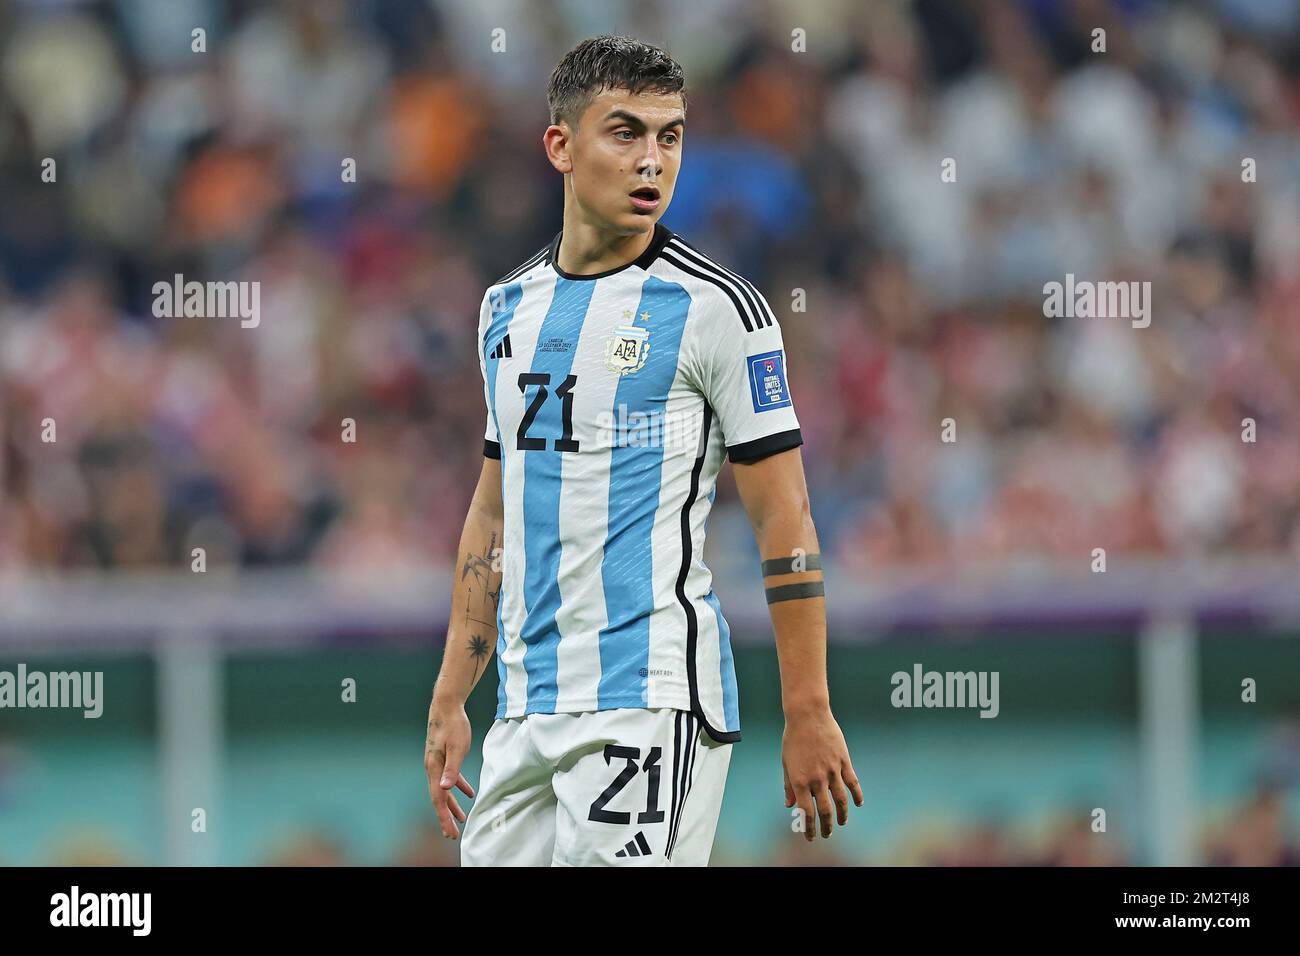 Paulo Dybala of Argentina during the FIFA World Cup Qatar 2022 match, Semi-final between Argentina and Croatia played at Lusail Stadium on Dec 13, 2022 in Lusail, Qatar. (Photo by Heuler Anbdrey / DiaEsportivo / Pressinphoto/Sipa USA) Stock Photo